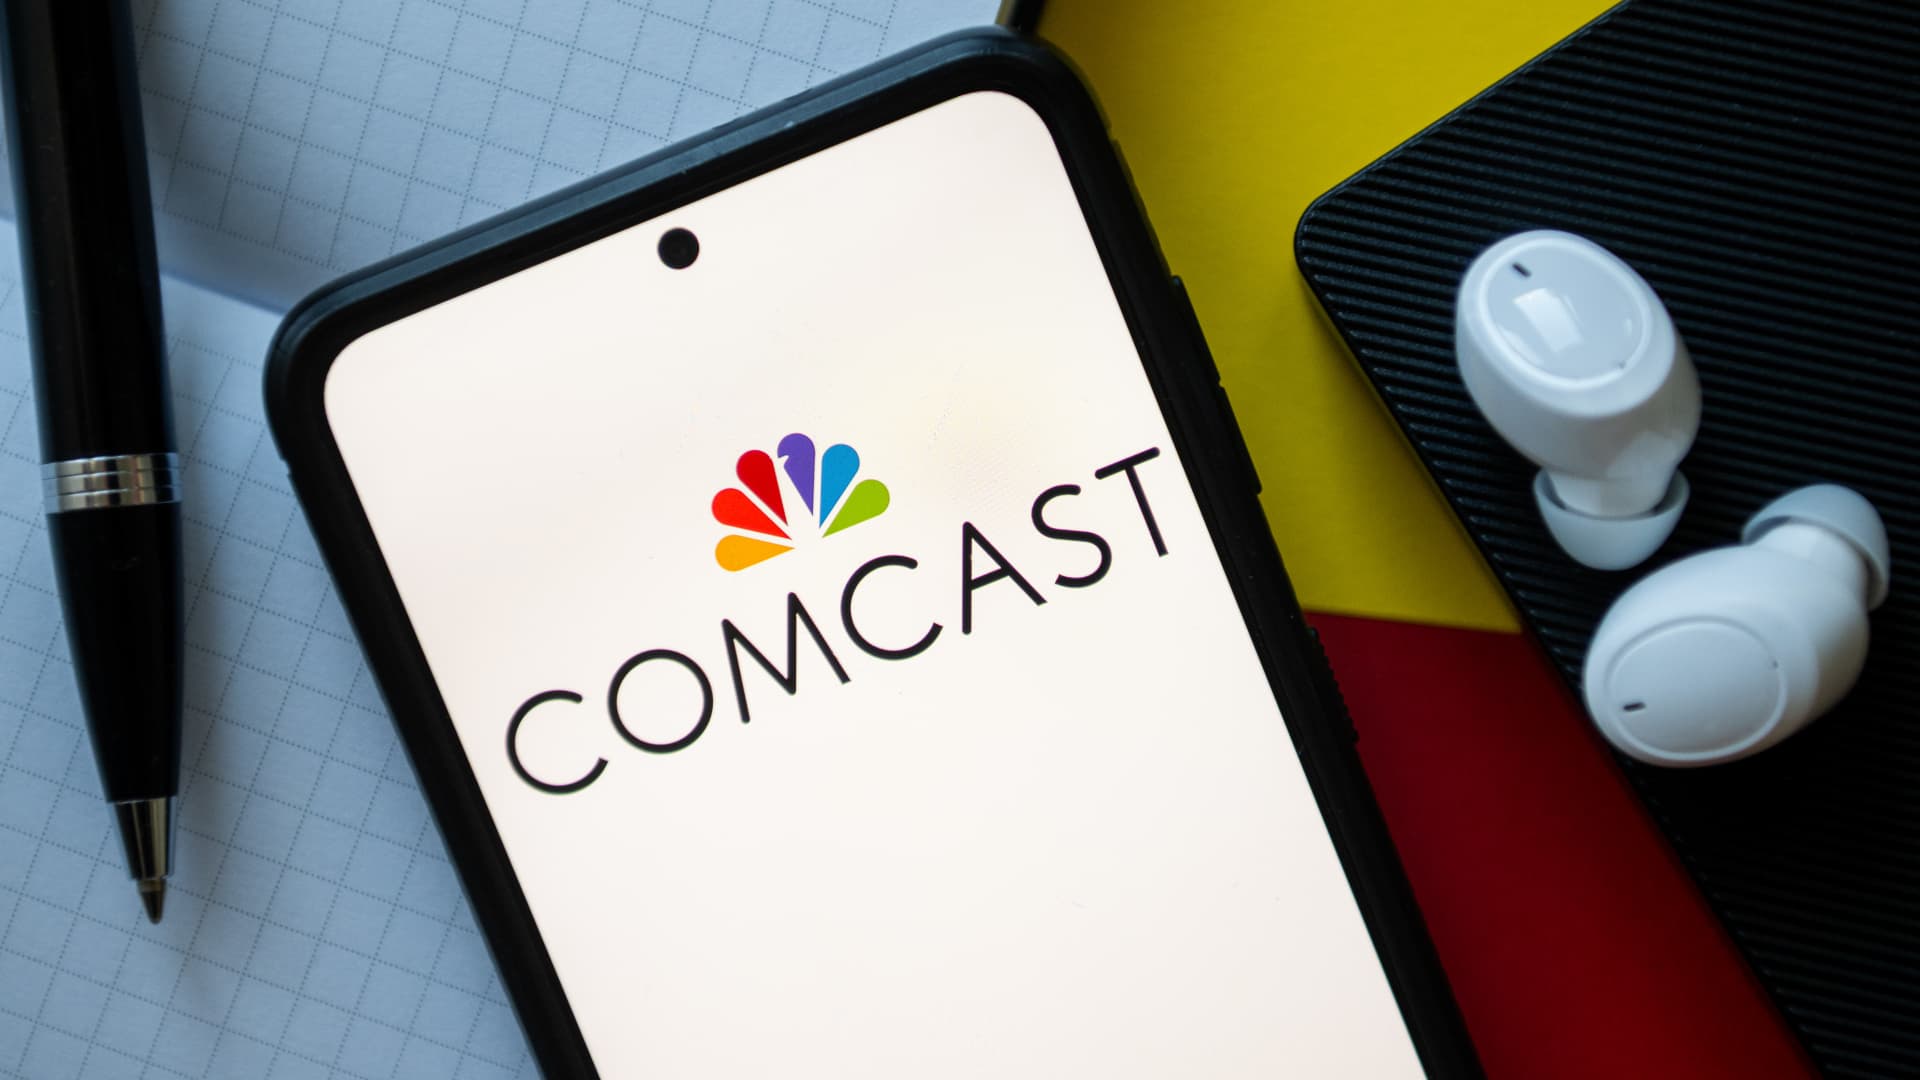 Comcast launches NOW, prepaid and month-to-month internet, phone plans